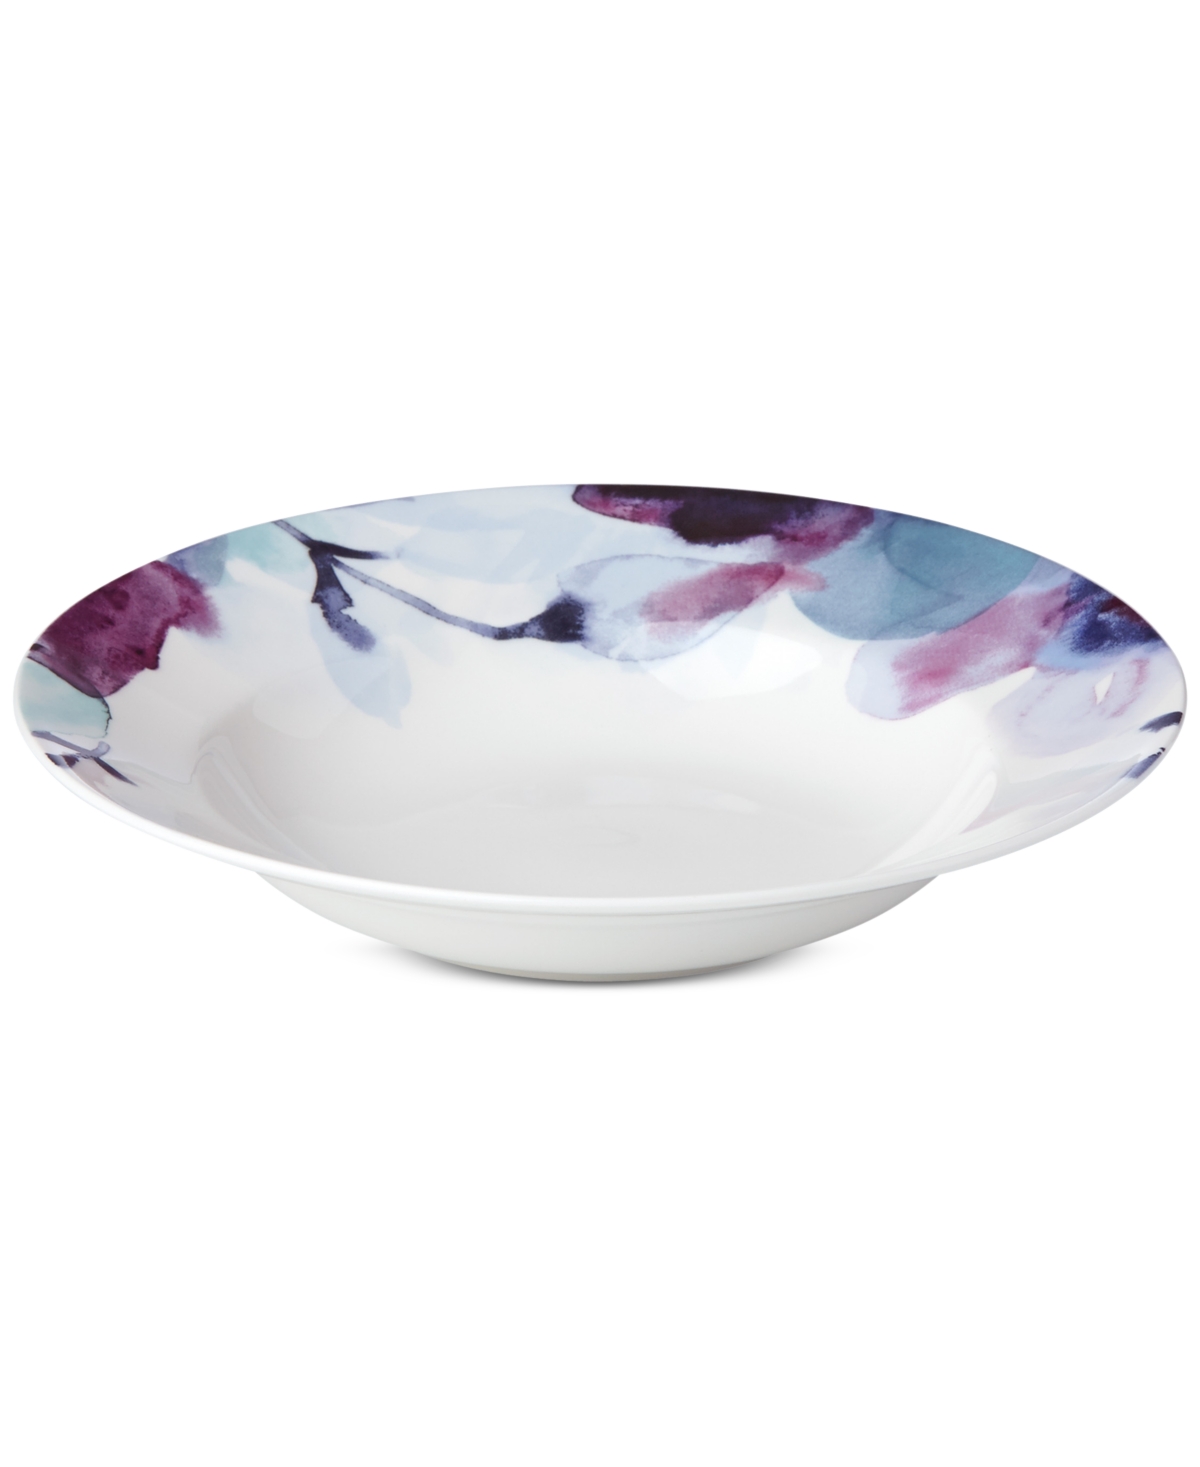 Indigo Watercolor Floral Rim Soup Bowl, Created for Macy's - White